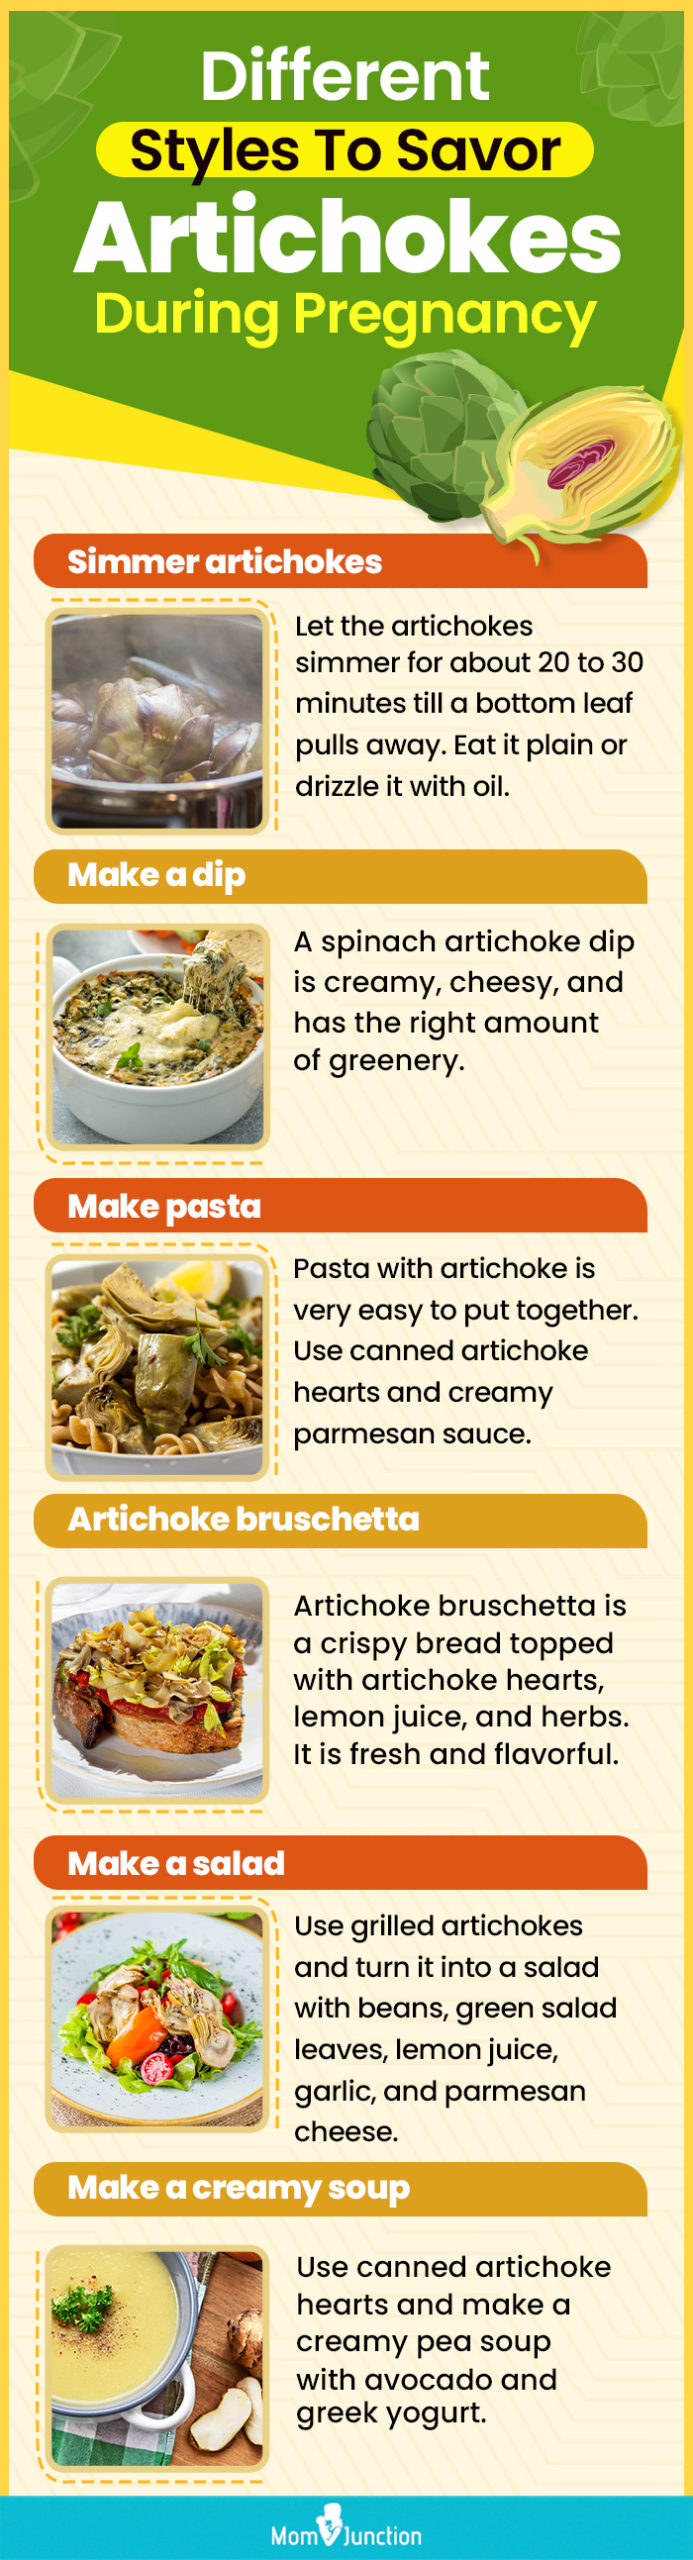 different styles to savor artichokes during pregnancy (infographic)